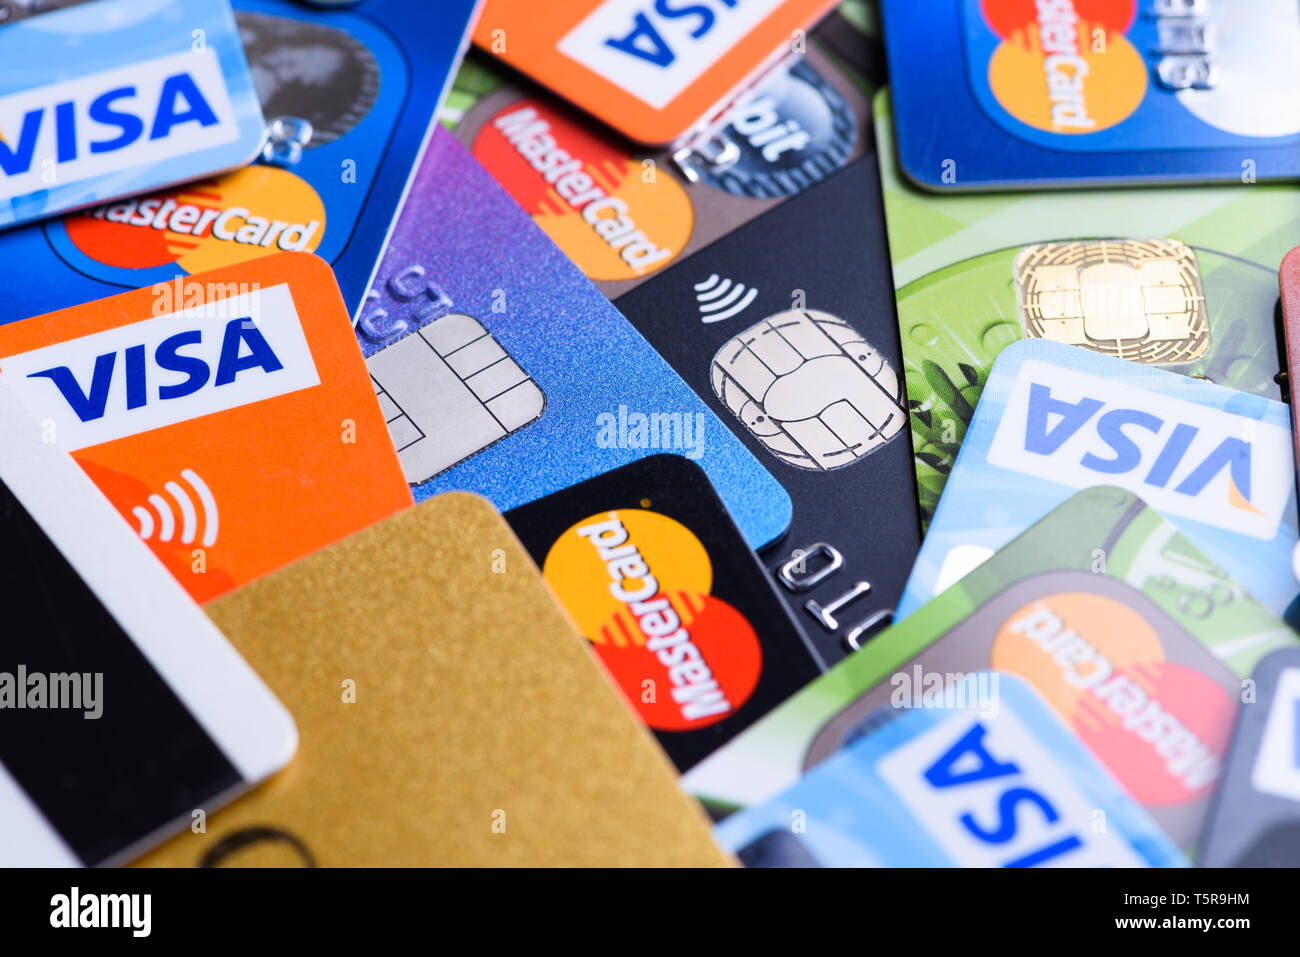 Krakow, Poland - June 16, 2017: Pile of plastic bank payment cards, Visa and Mastercard, credit and debit with different chips and wireless payment te Stock Photo